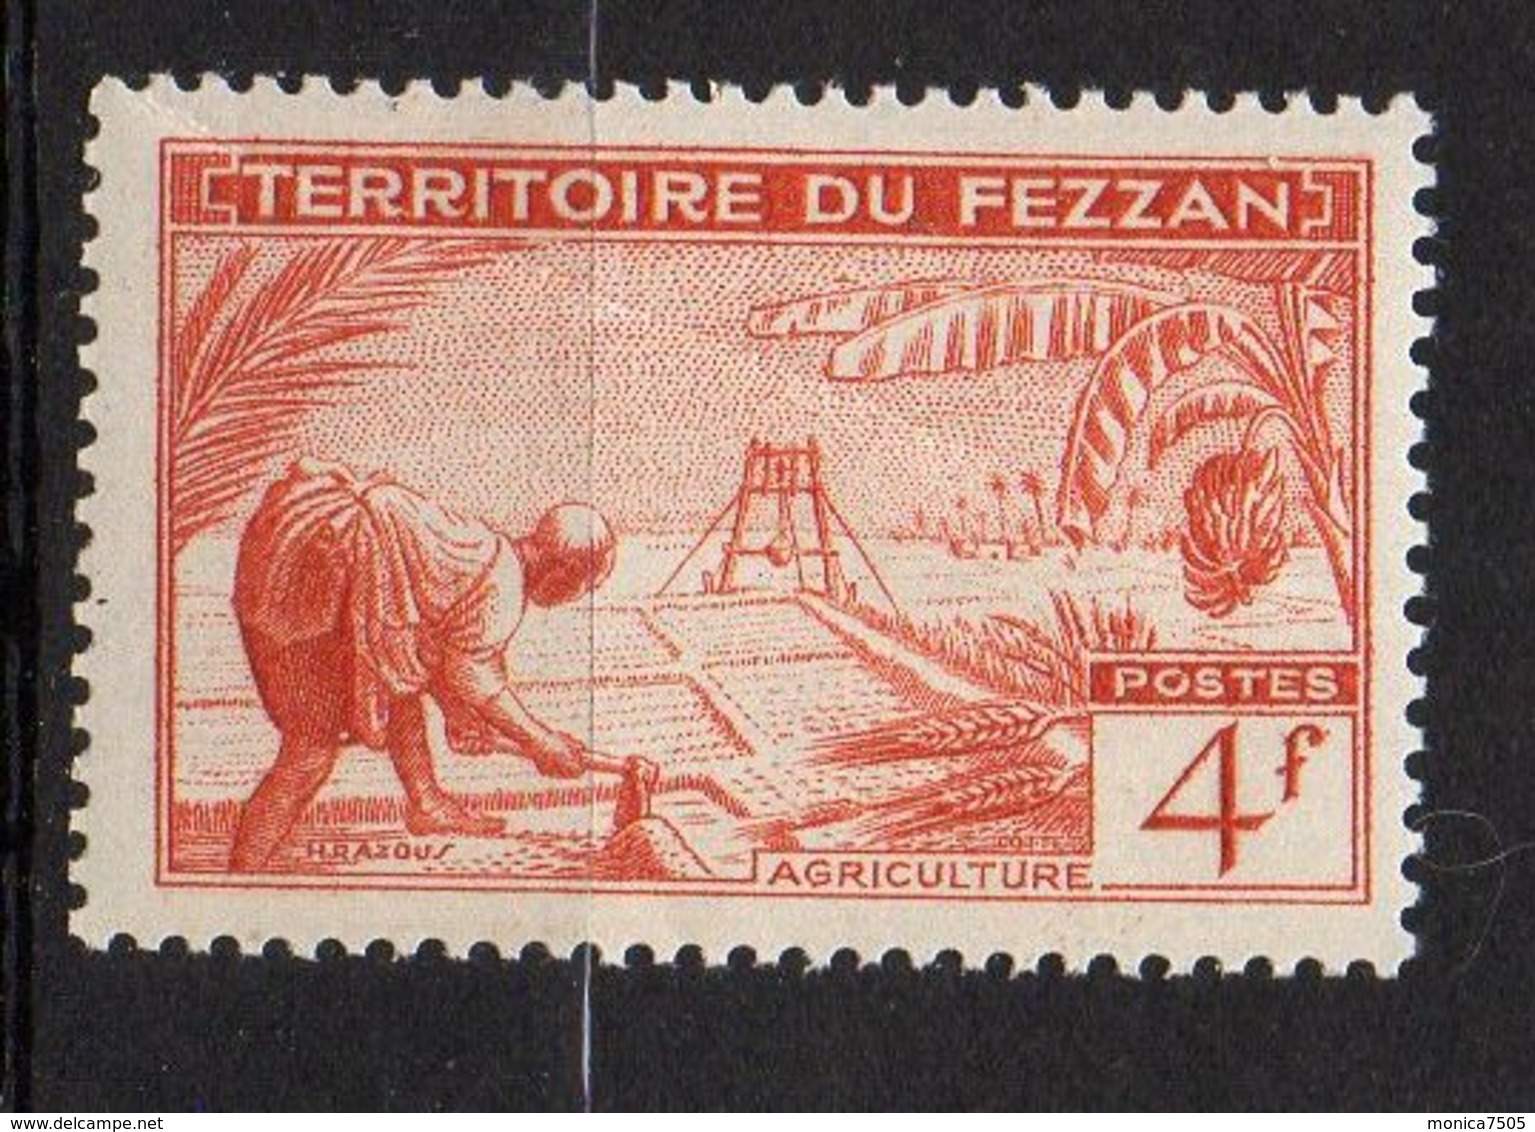 FEZZAN (  POSTE  ) : Y&T  N°  59  TIMBRE  NEUF  SANS  TRACE  DE  CHARNIERE . - Unused Stamps